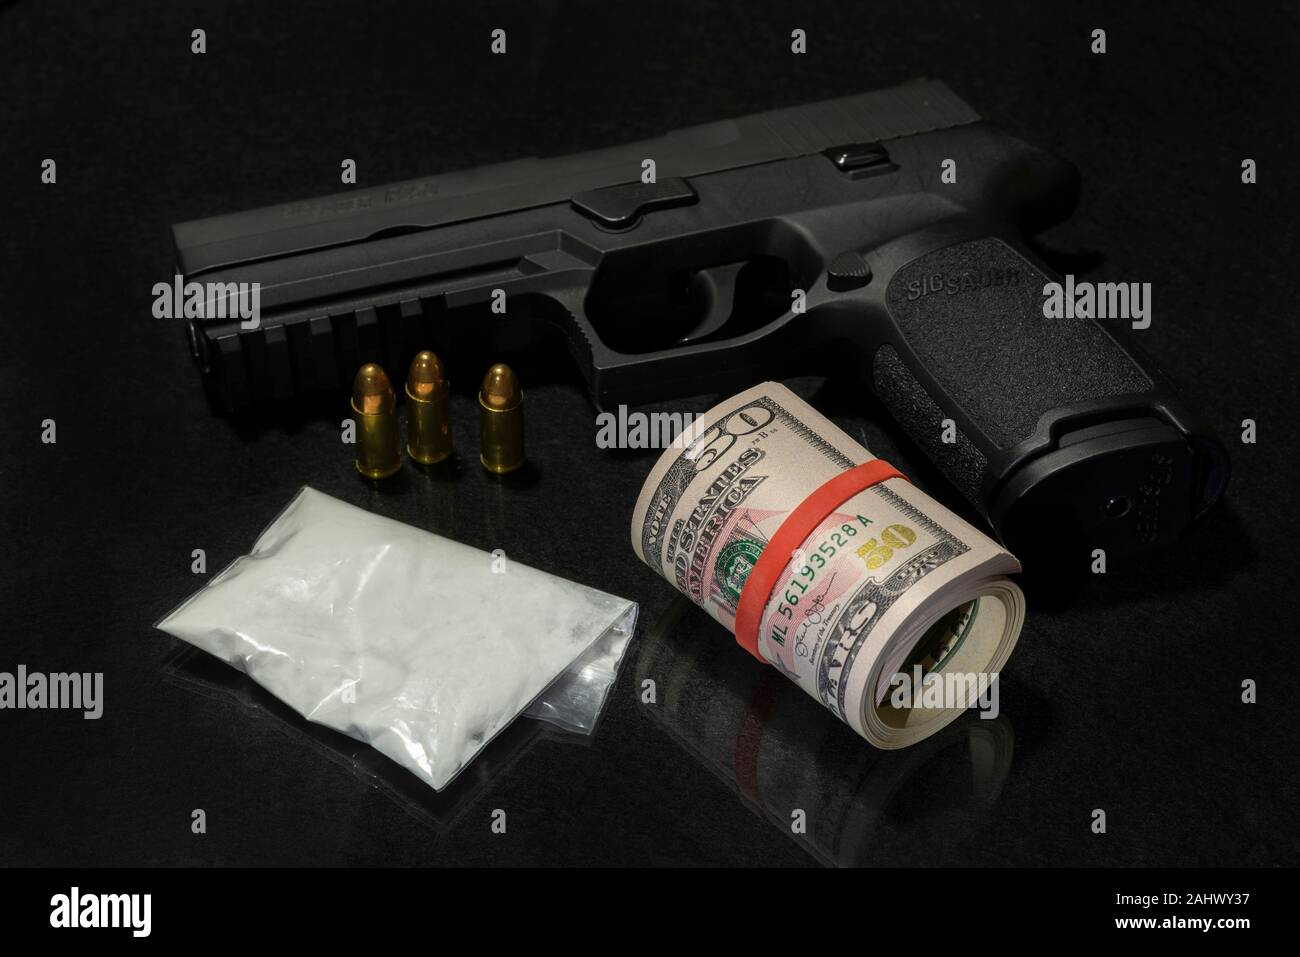 Bag of powdered drugs with a Sig Sauer handgun and a roll of $50 dollar bills on a black background. Stock Photo